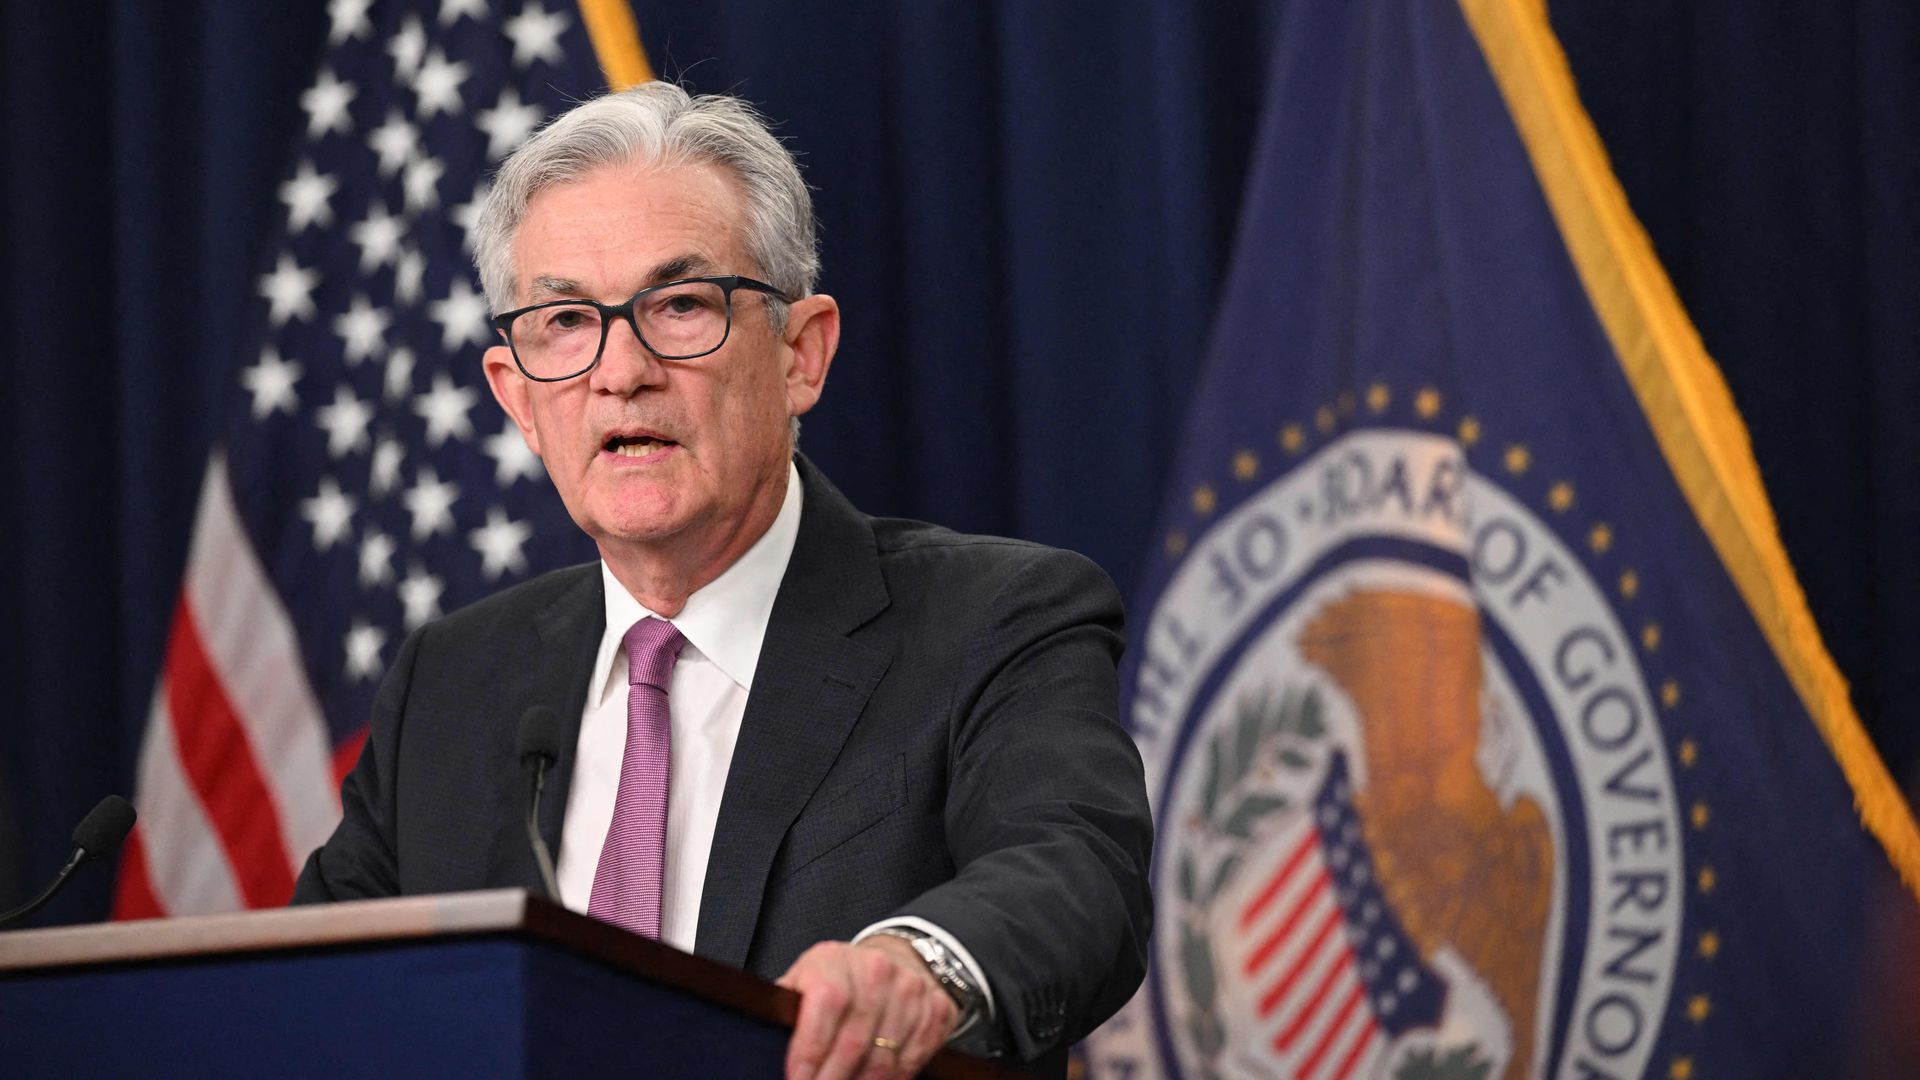 Fed chair Jerome Powell stands at a podium